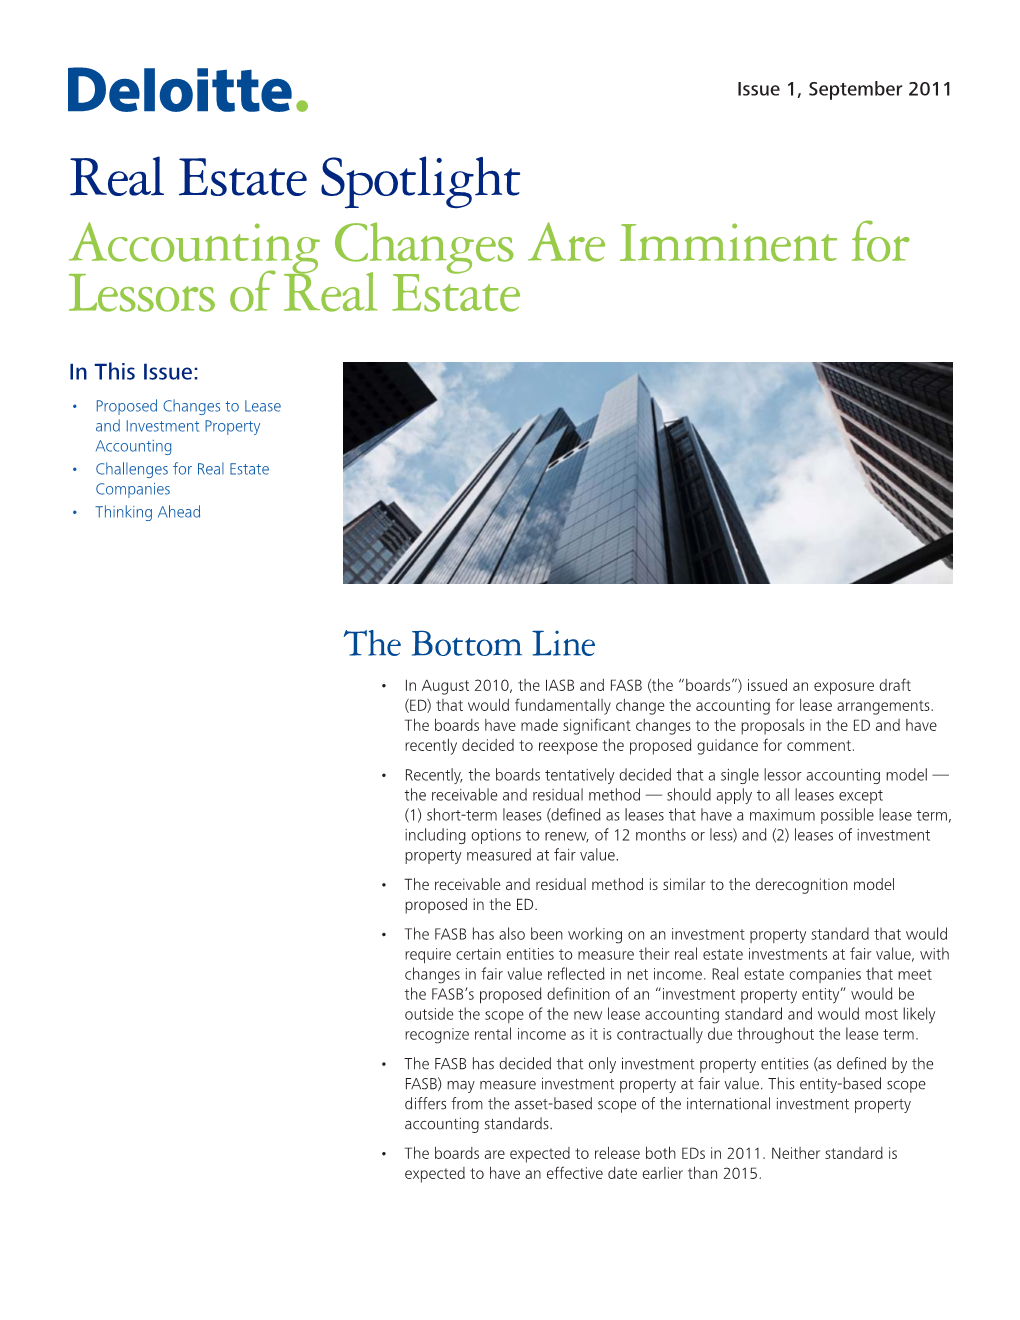 Real Estate Spotlight Accounting Changes Are Imminent for Lessors of Real Estate